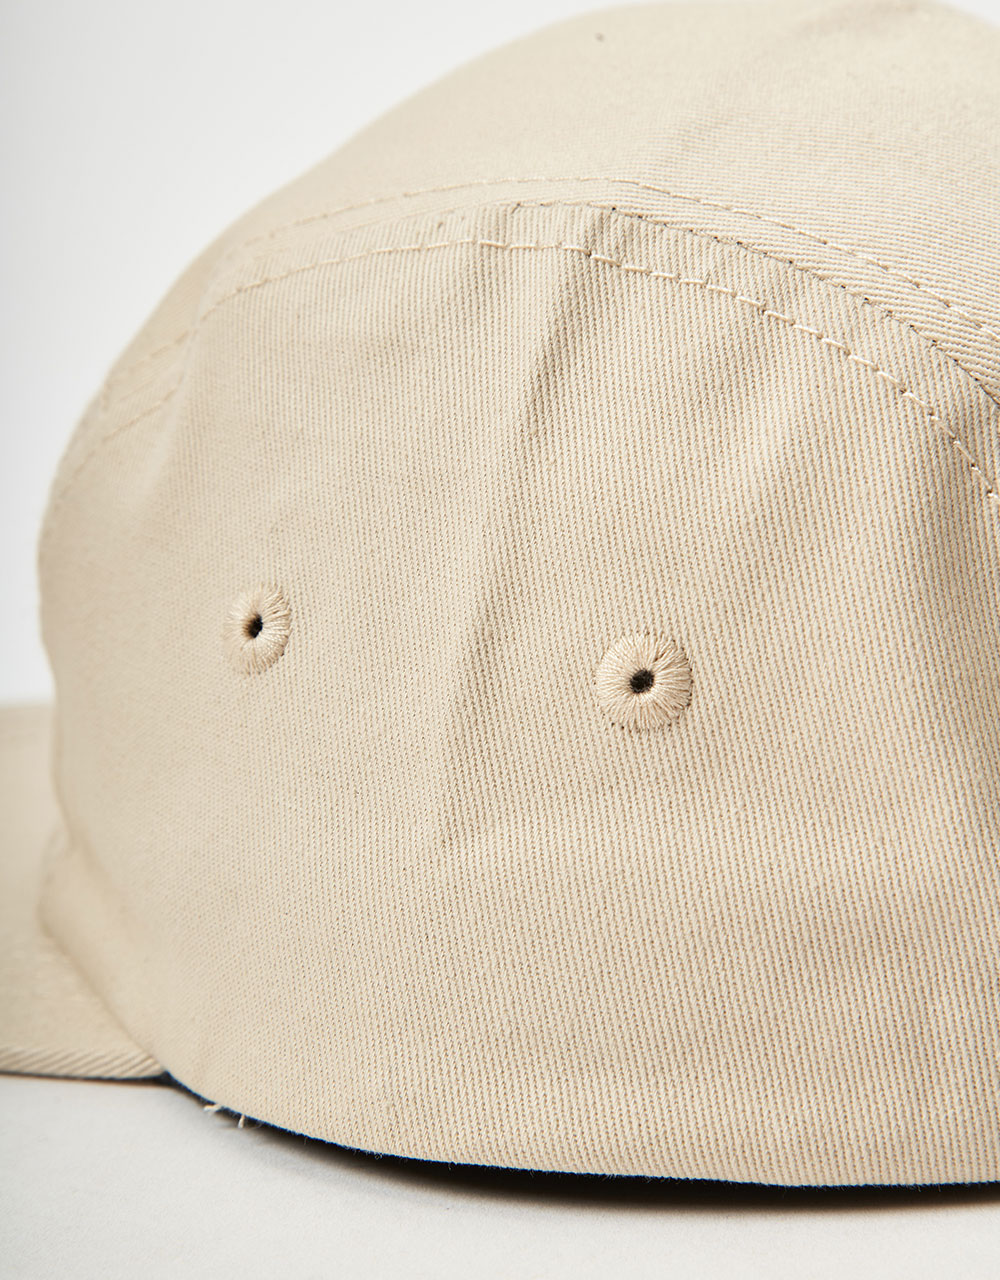 Route One Daysplay 5 Panel Cap - Beige